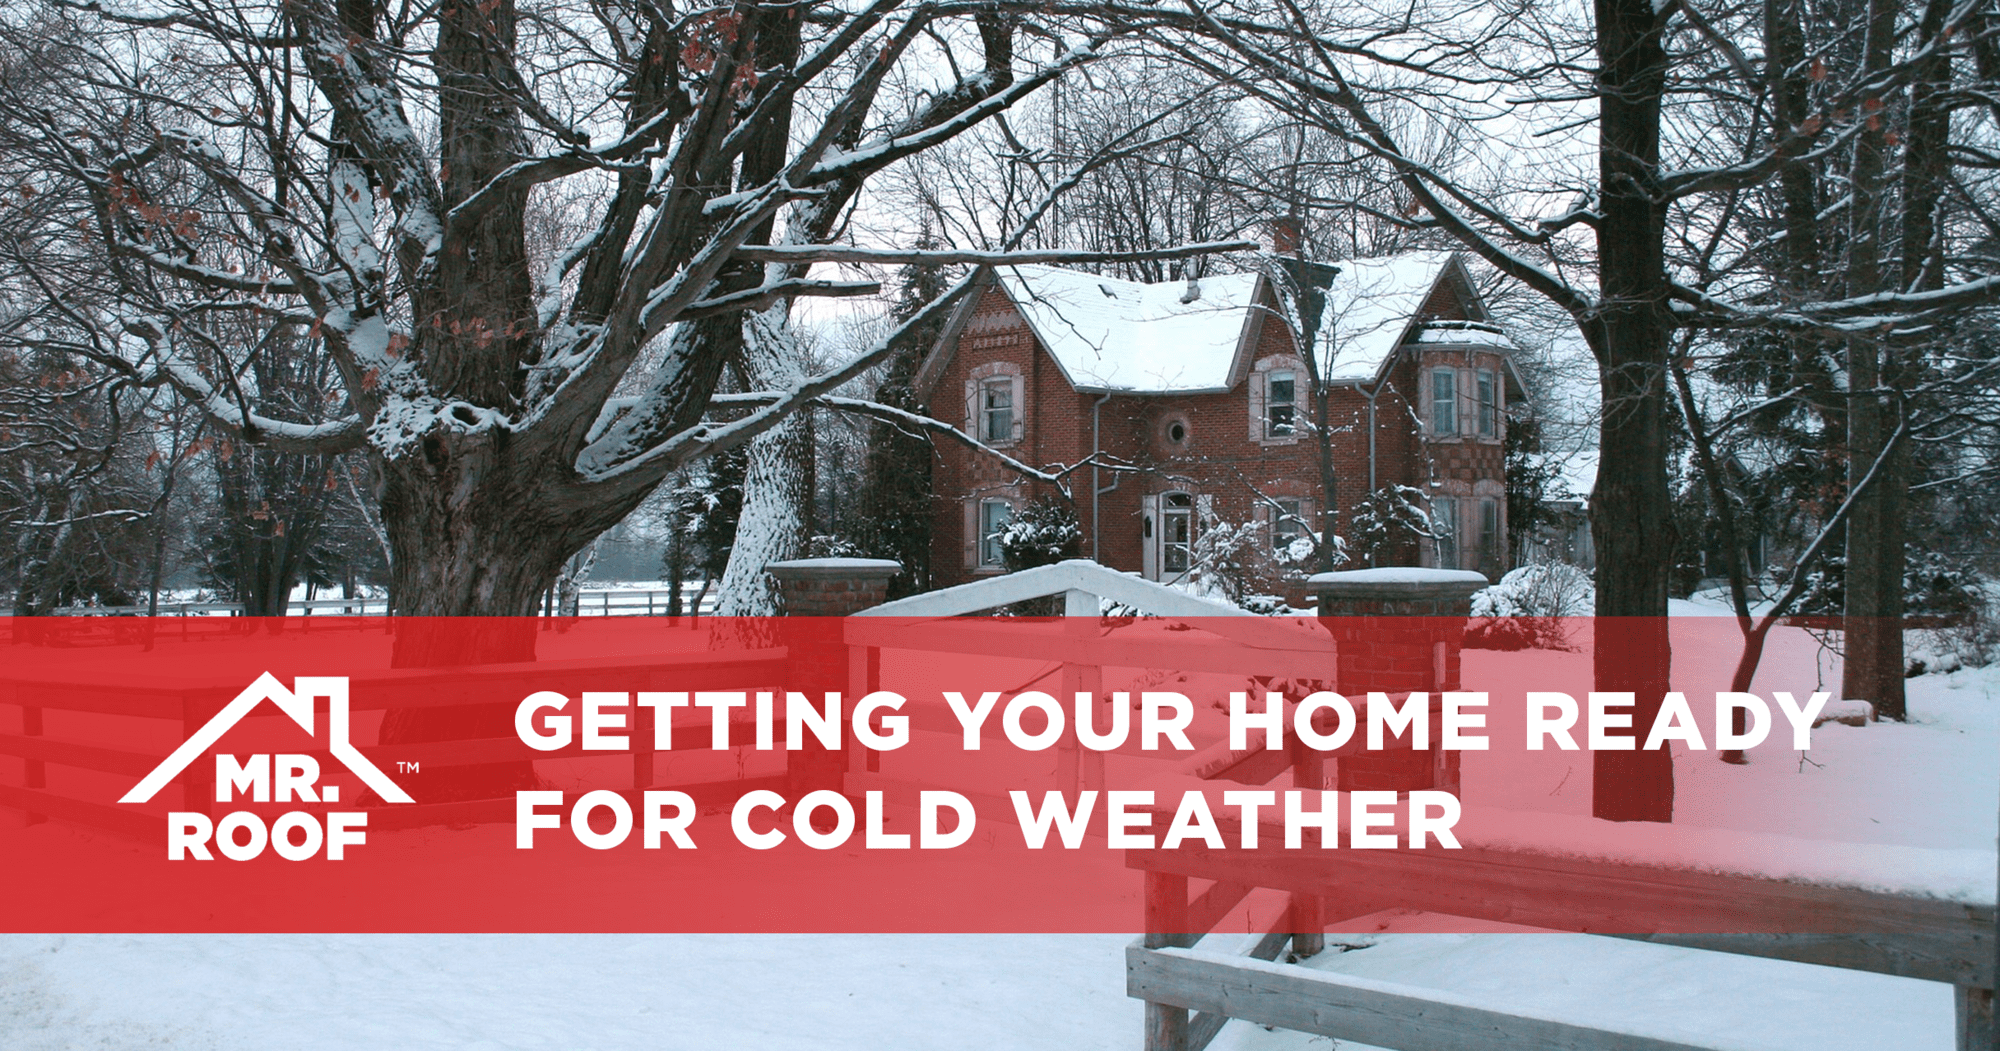 A Checklist for Getting Your Home Ready for Cold Weather